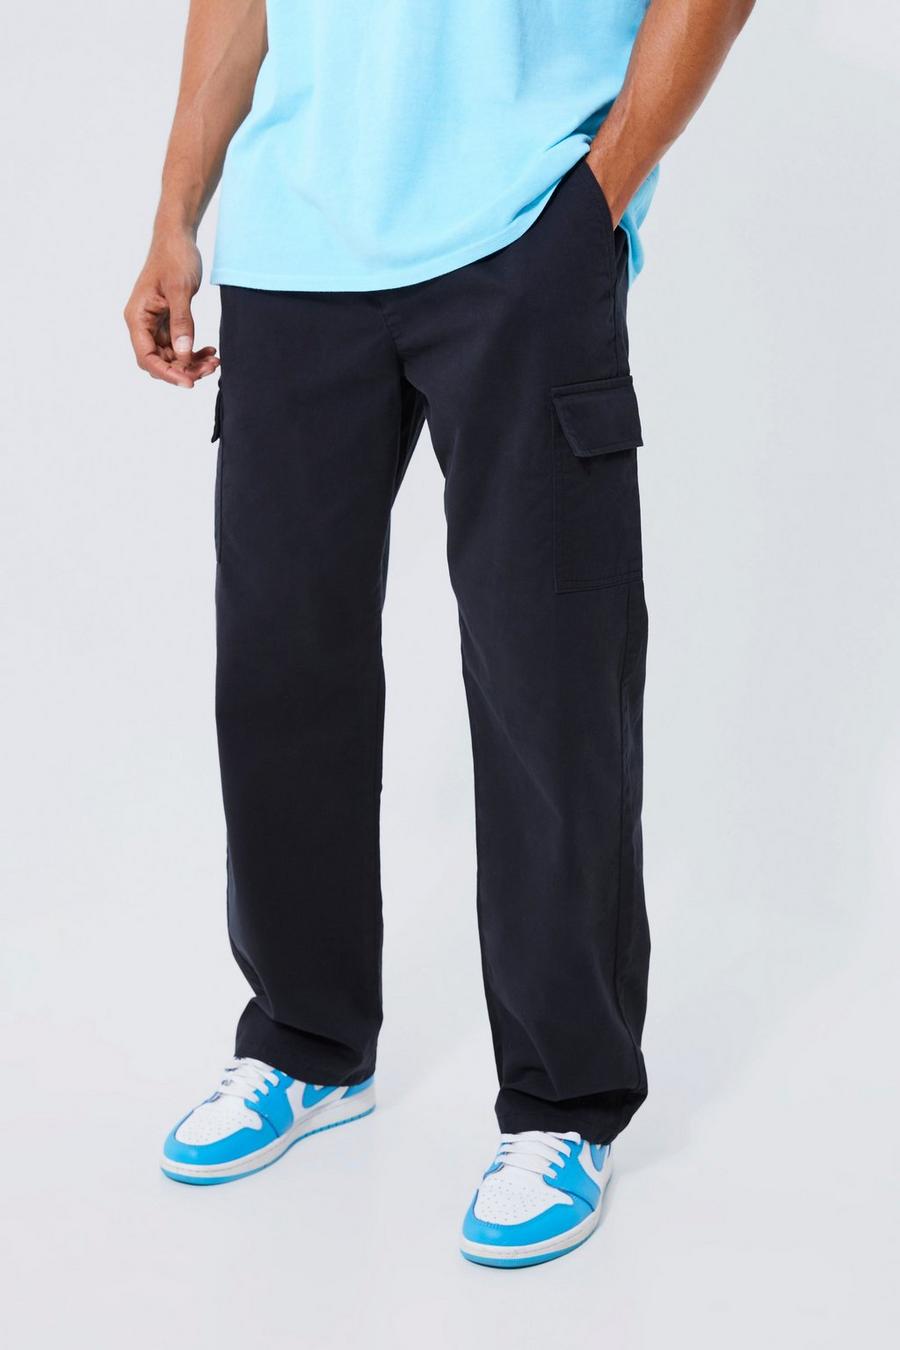 Black Elastic Waist Relaxed Fit Cargo Pants